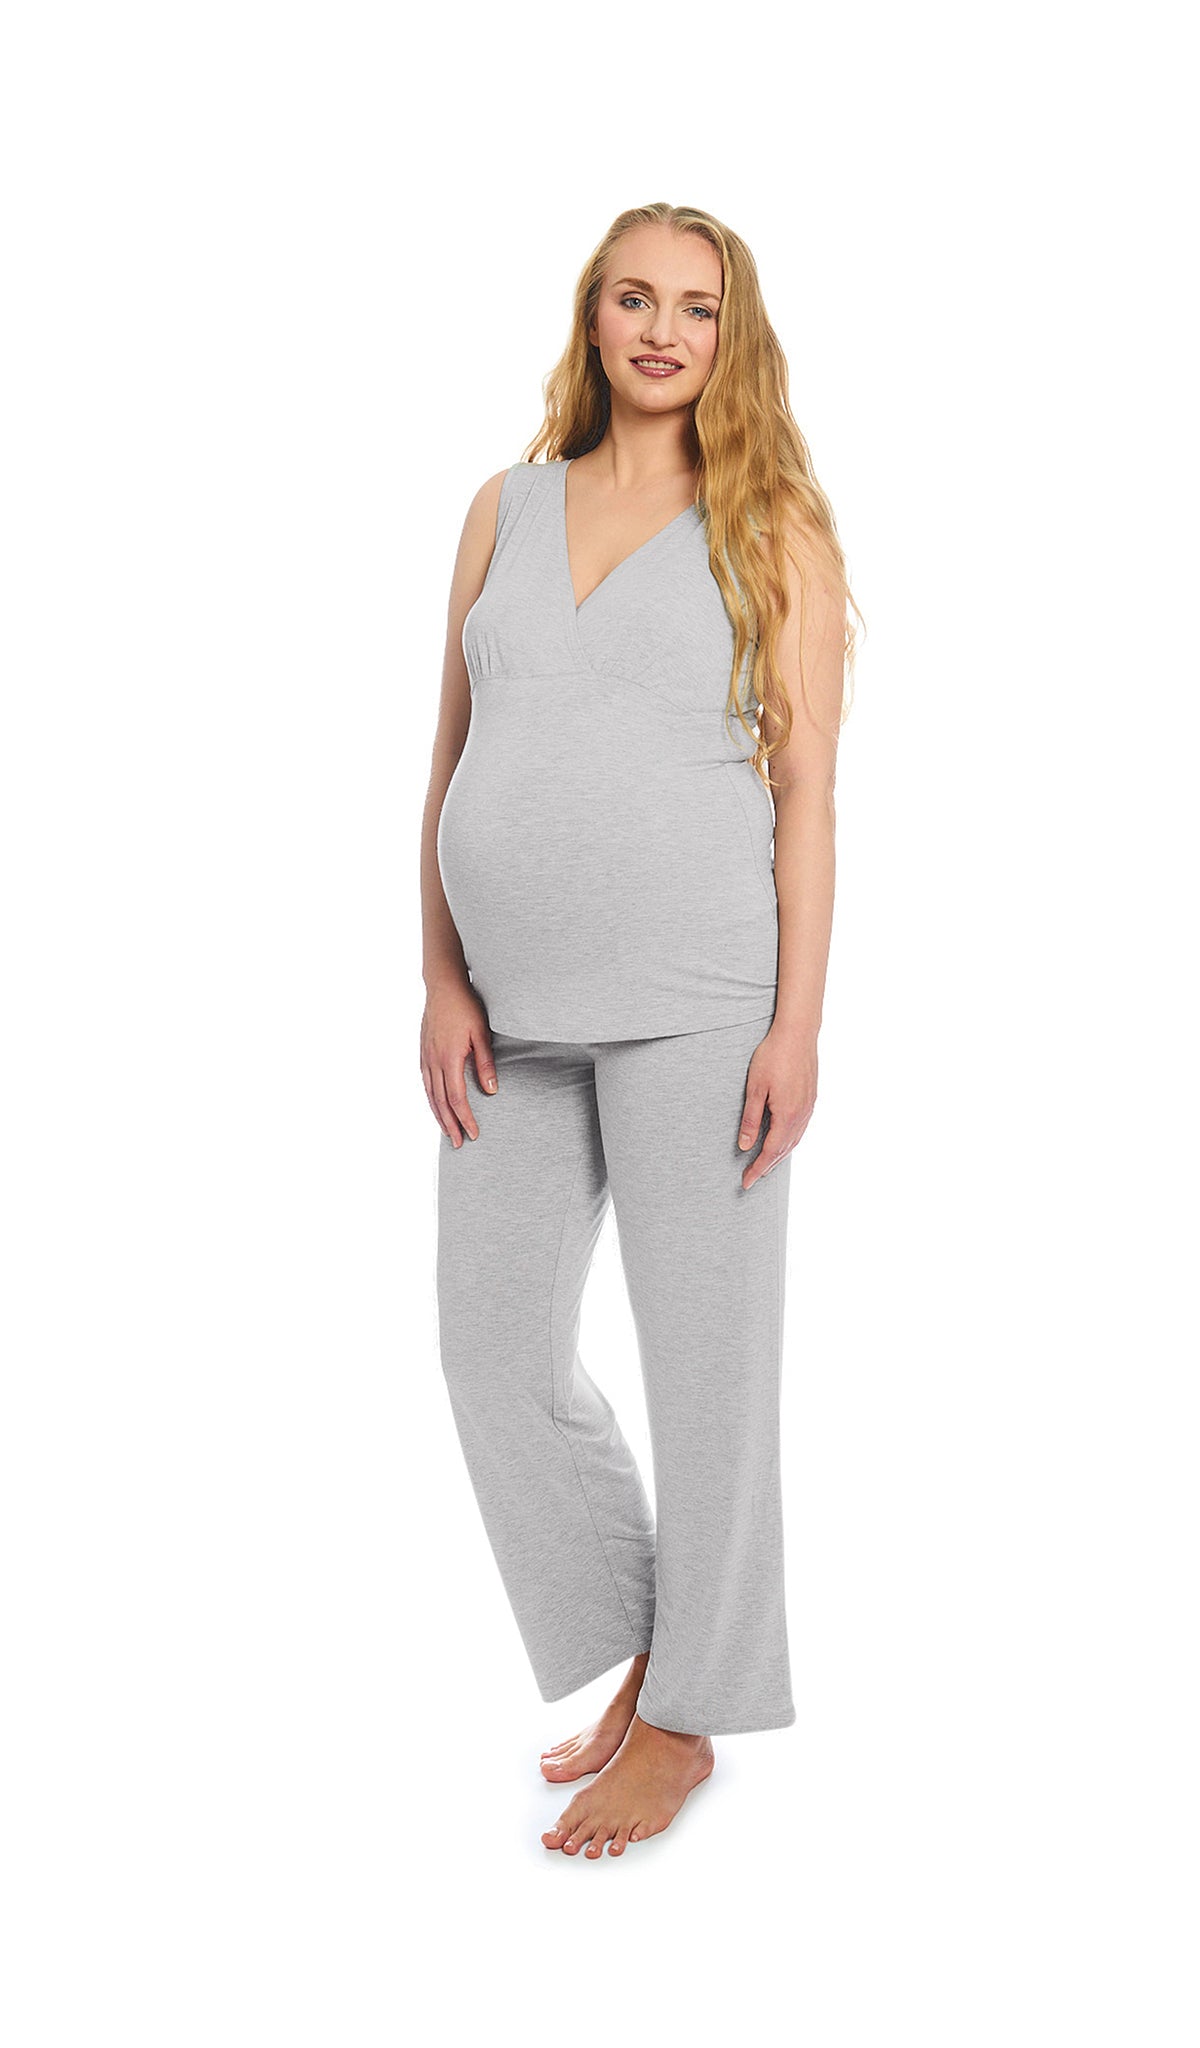 Heather Grey Solid Analise 3-Piece Set, pregnant woman wearing criss-cross bust tank top and pant.